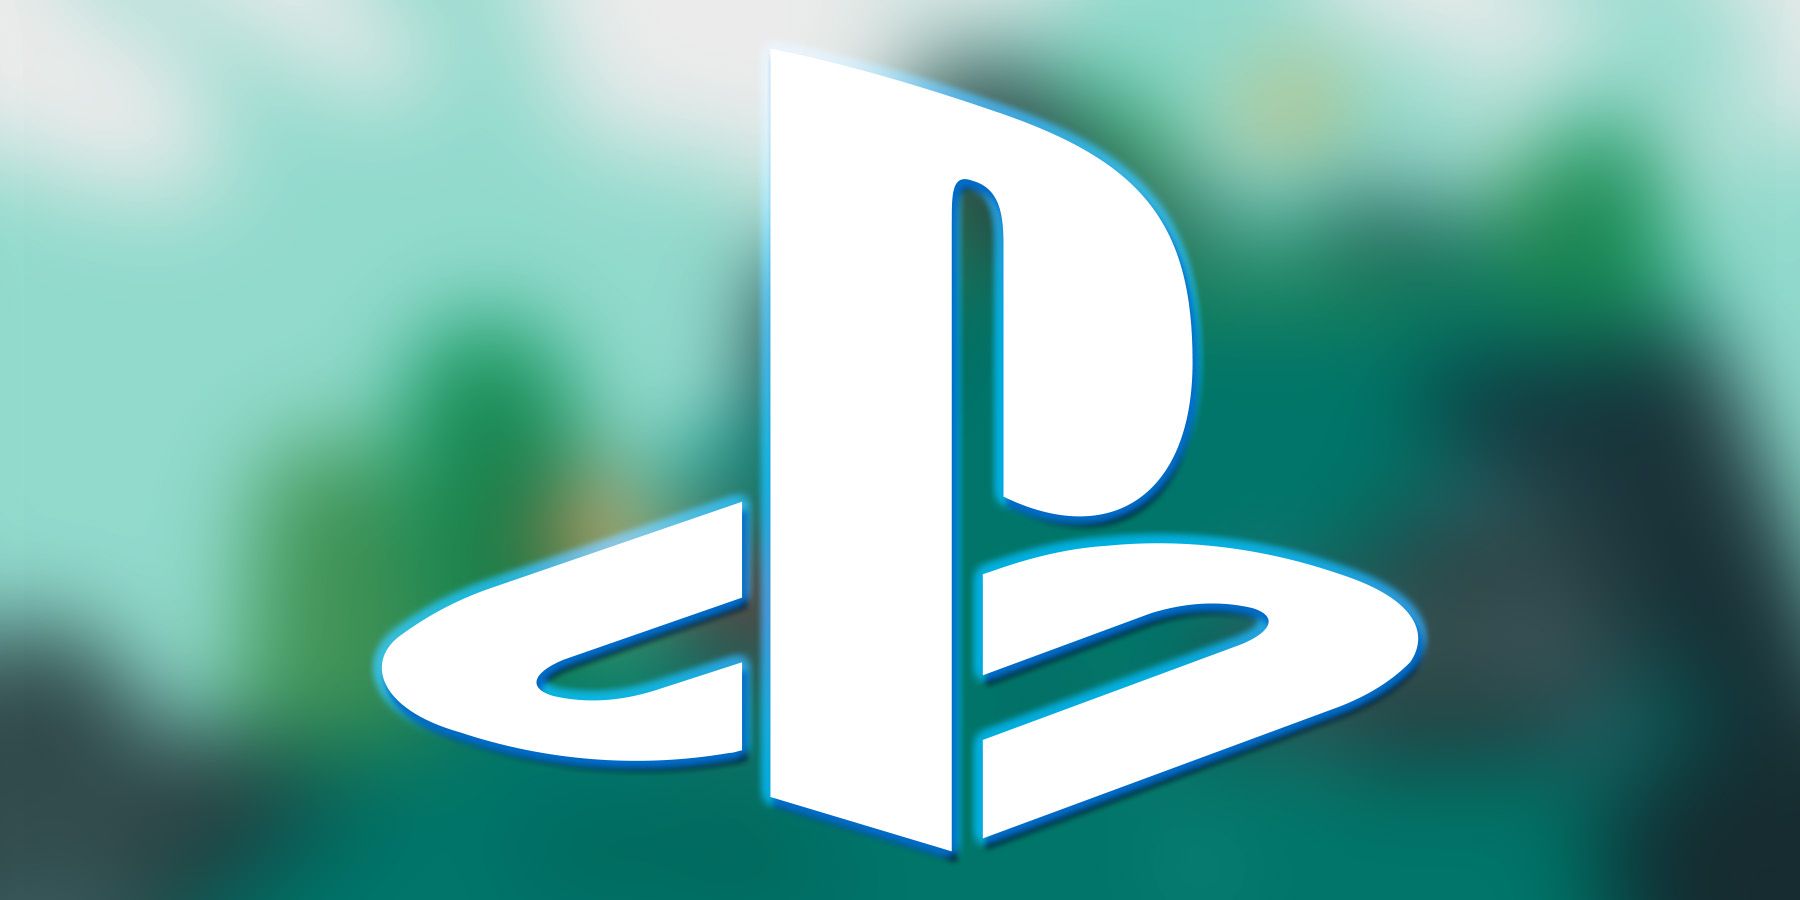 White PlayStation logo submark with blue outer glow on blurred What the Golf promo screenshot